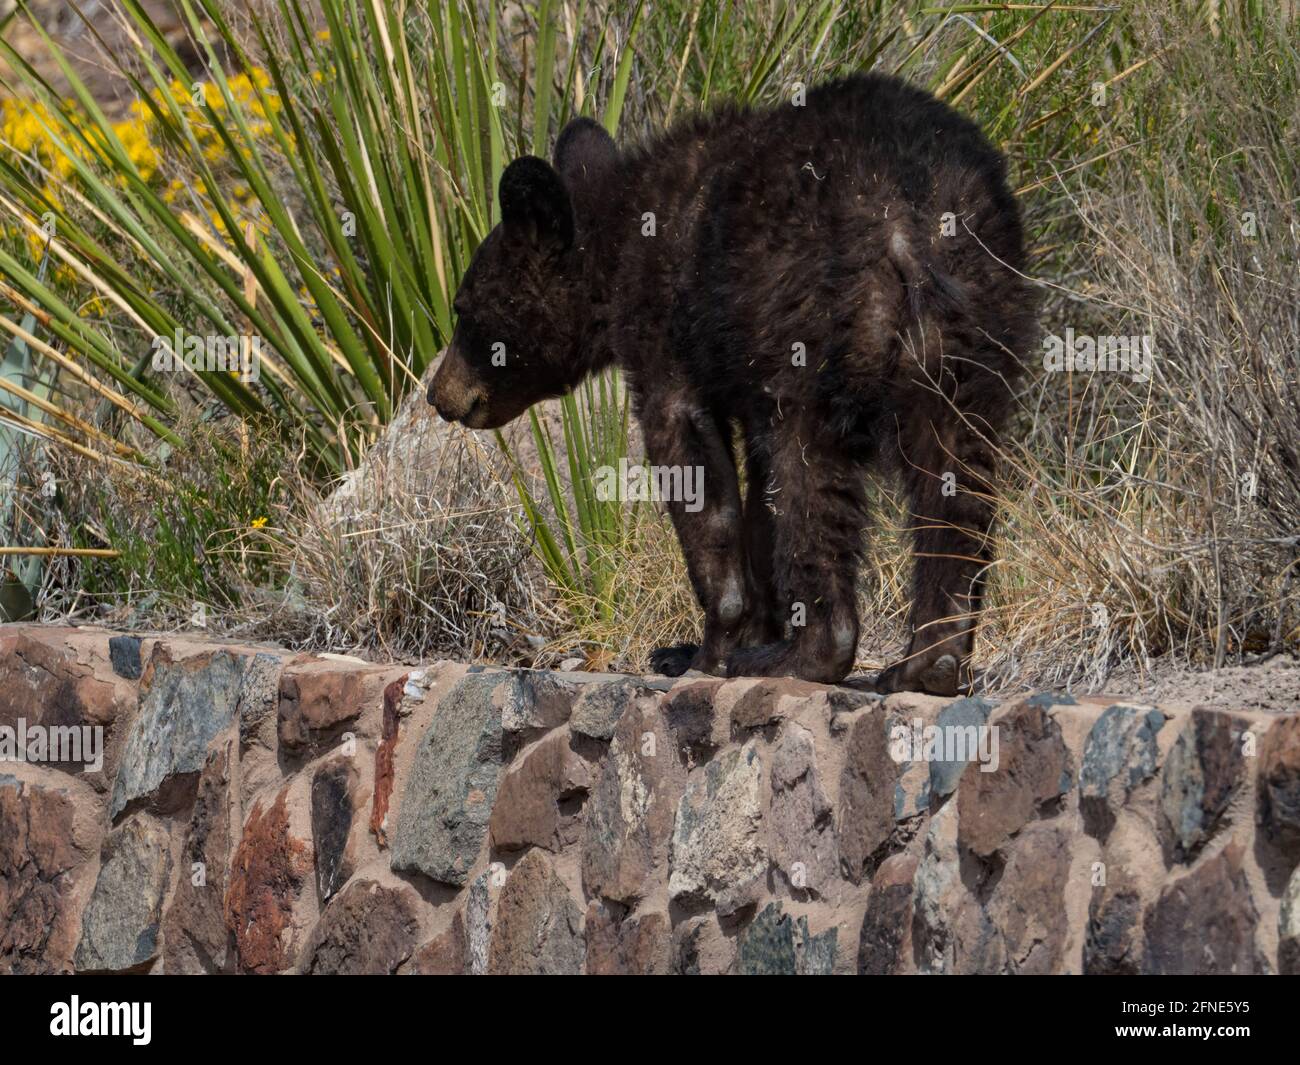 American Black Bear, Ursus americanus, with 2 cubs in the hotel area of Chisos Basin, Big Bend National Park, Texas, USA Stock Photo